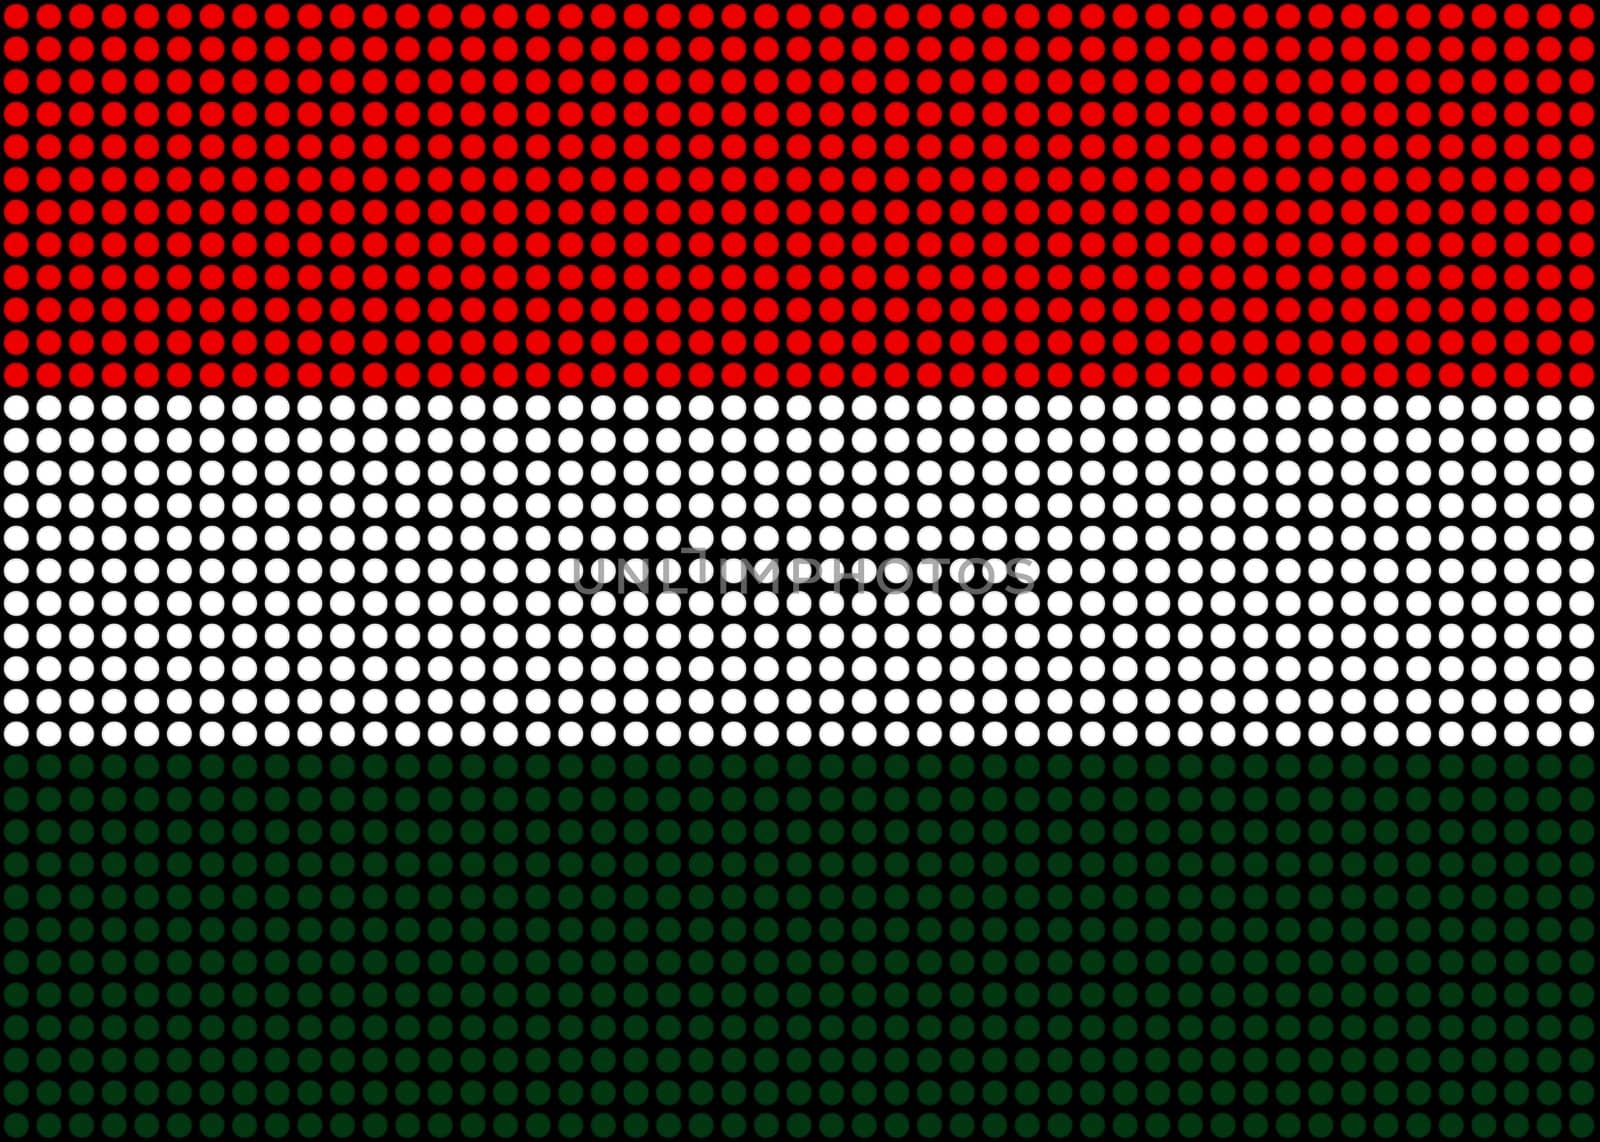 Illustrated Hungary flag made of dots